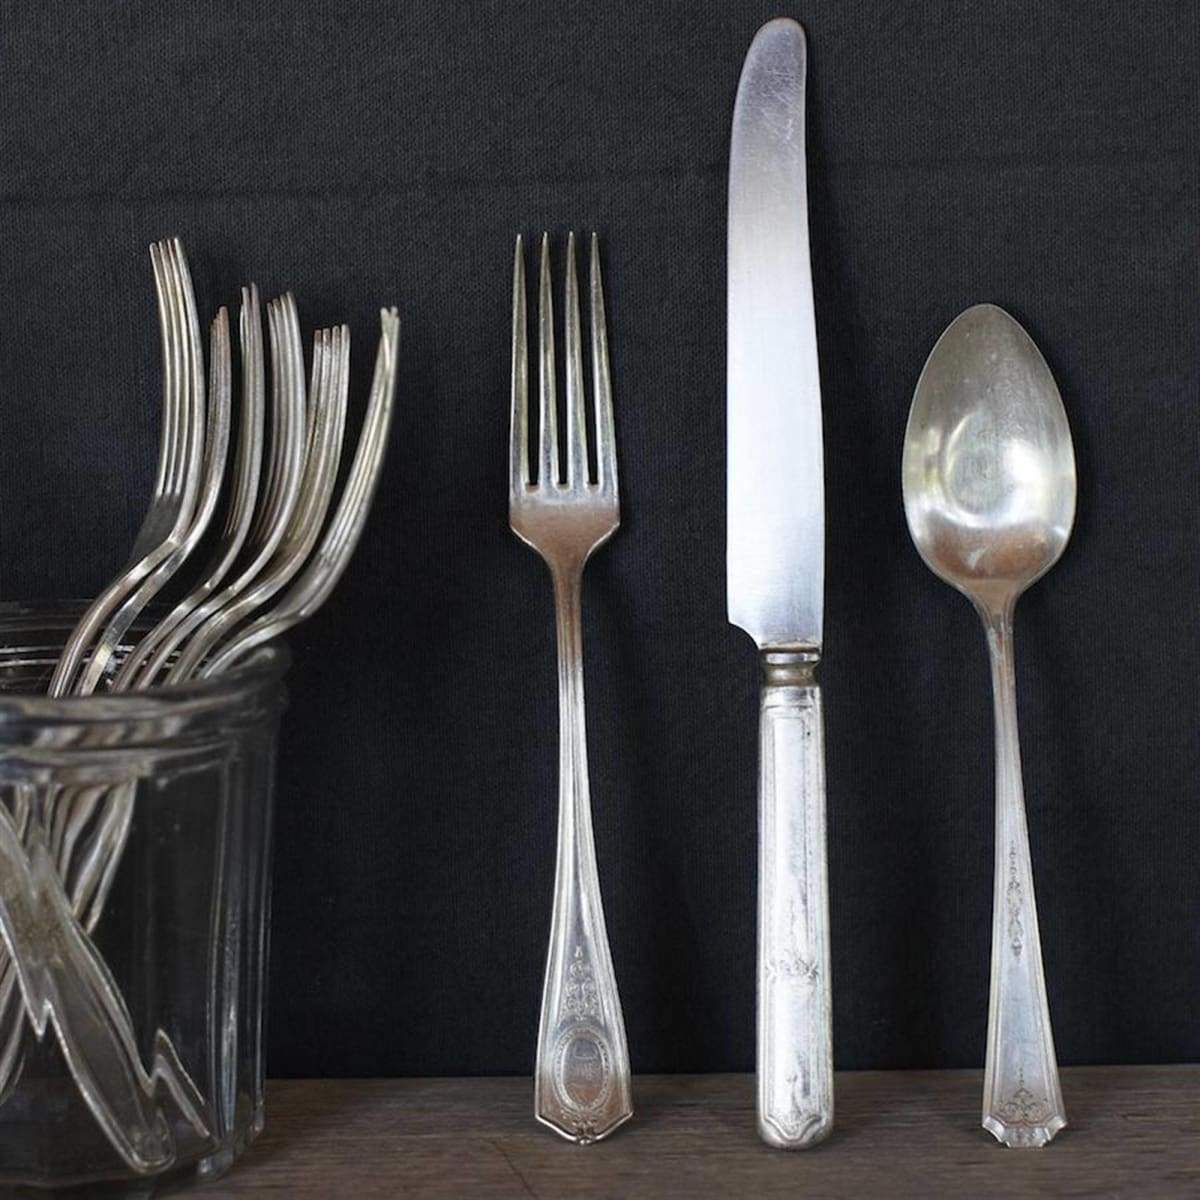 Vintage Silver-Plated Eclectic Flatware